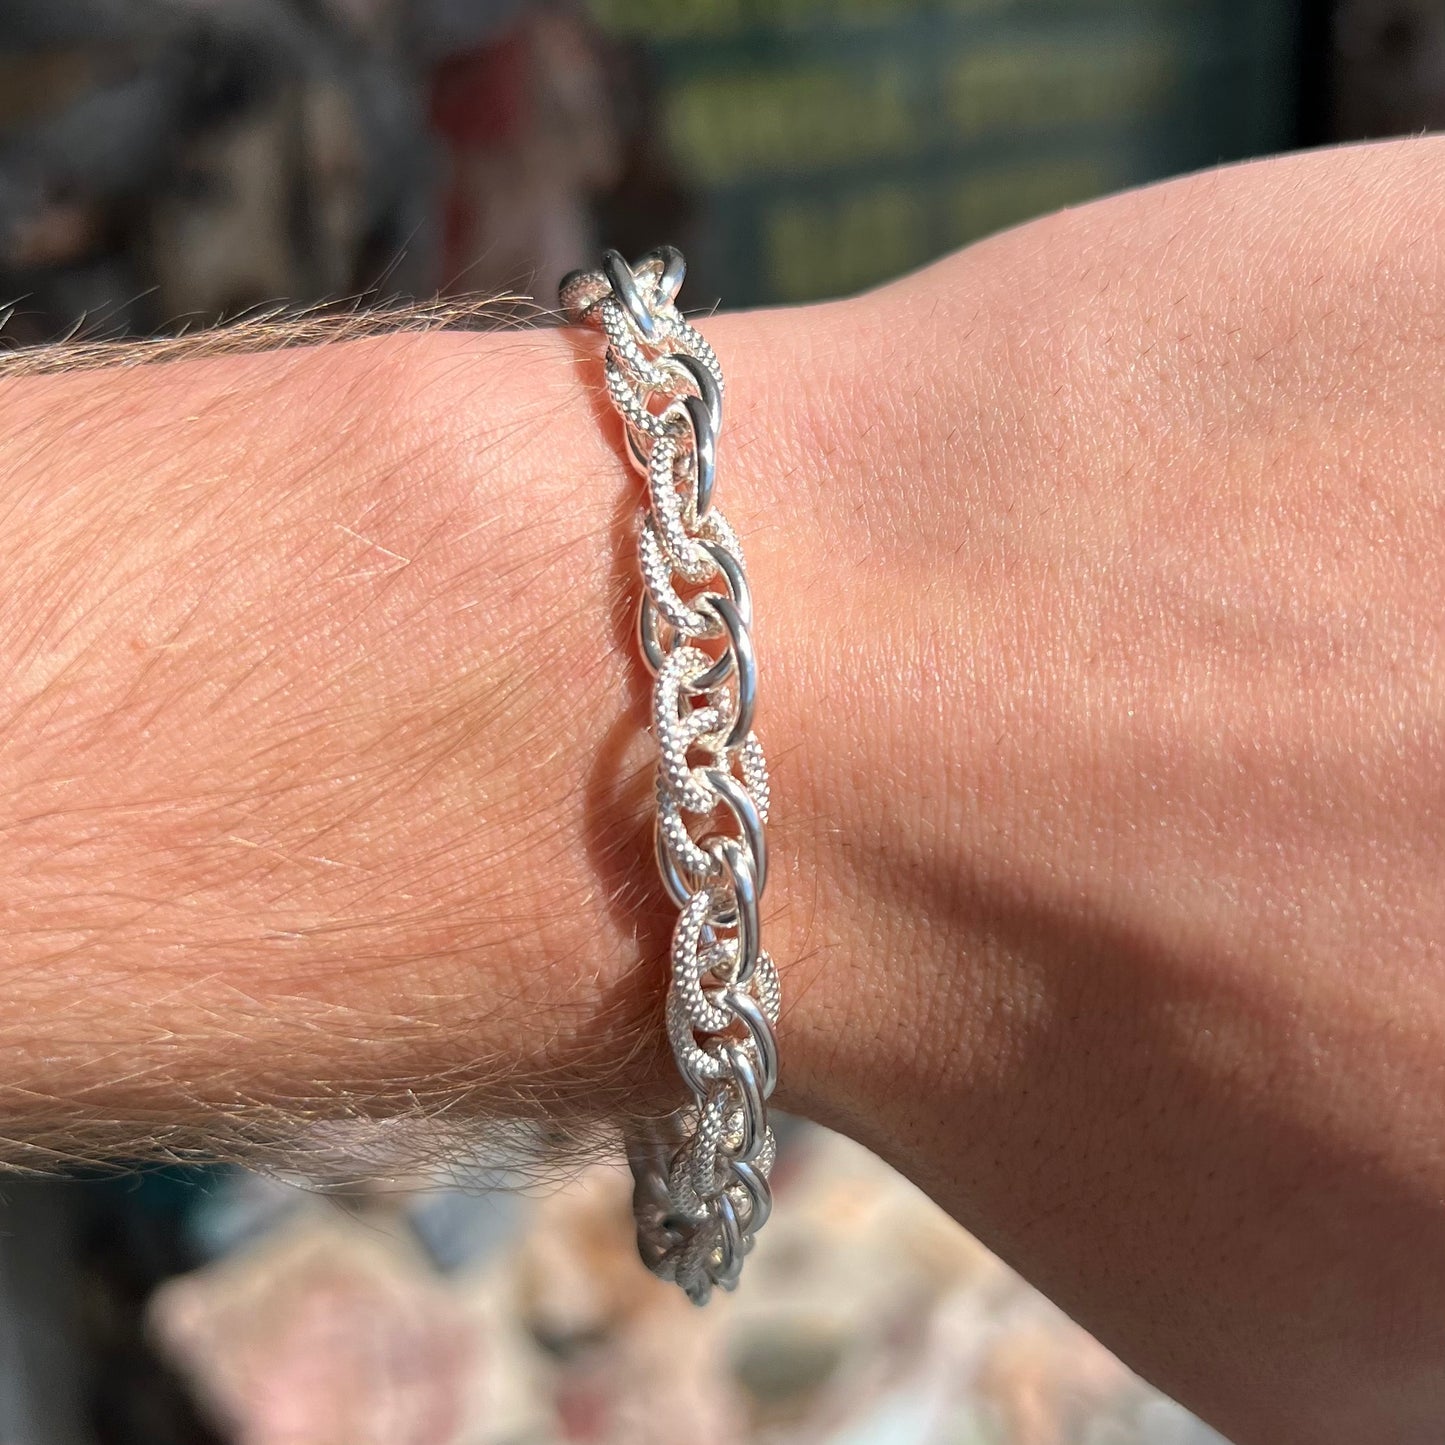 A silver toggle clasp link bracelet.  Some of the links are textured, and others are polished.  The toggle ring is stamped "India."